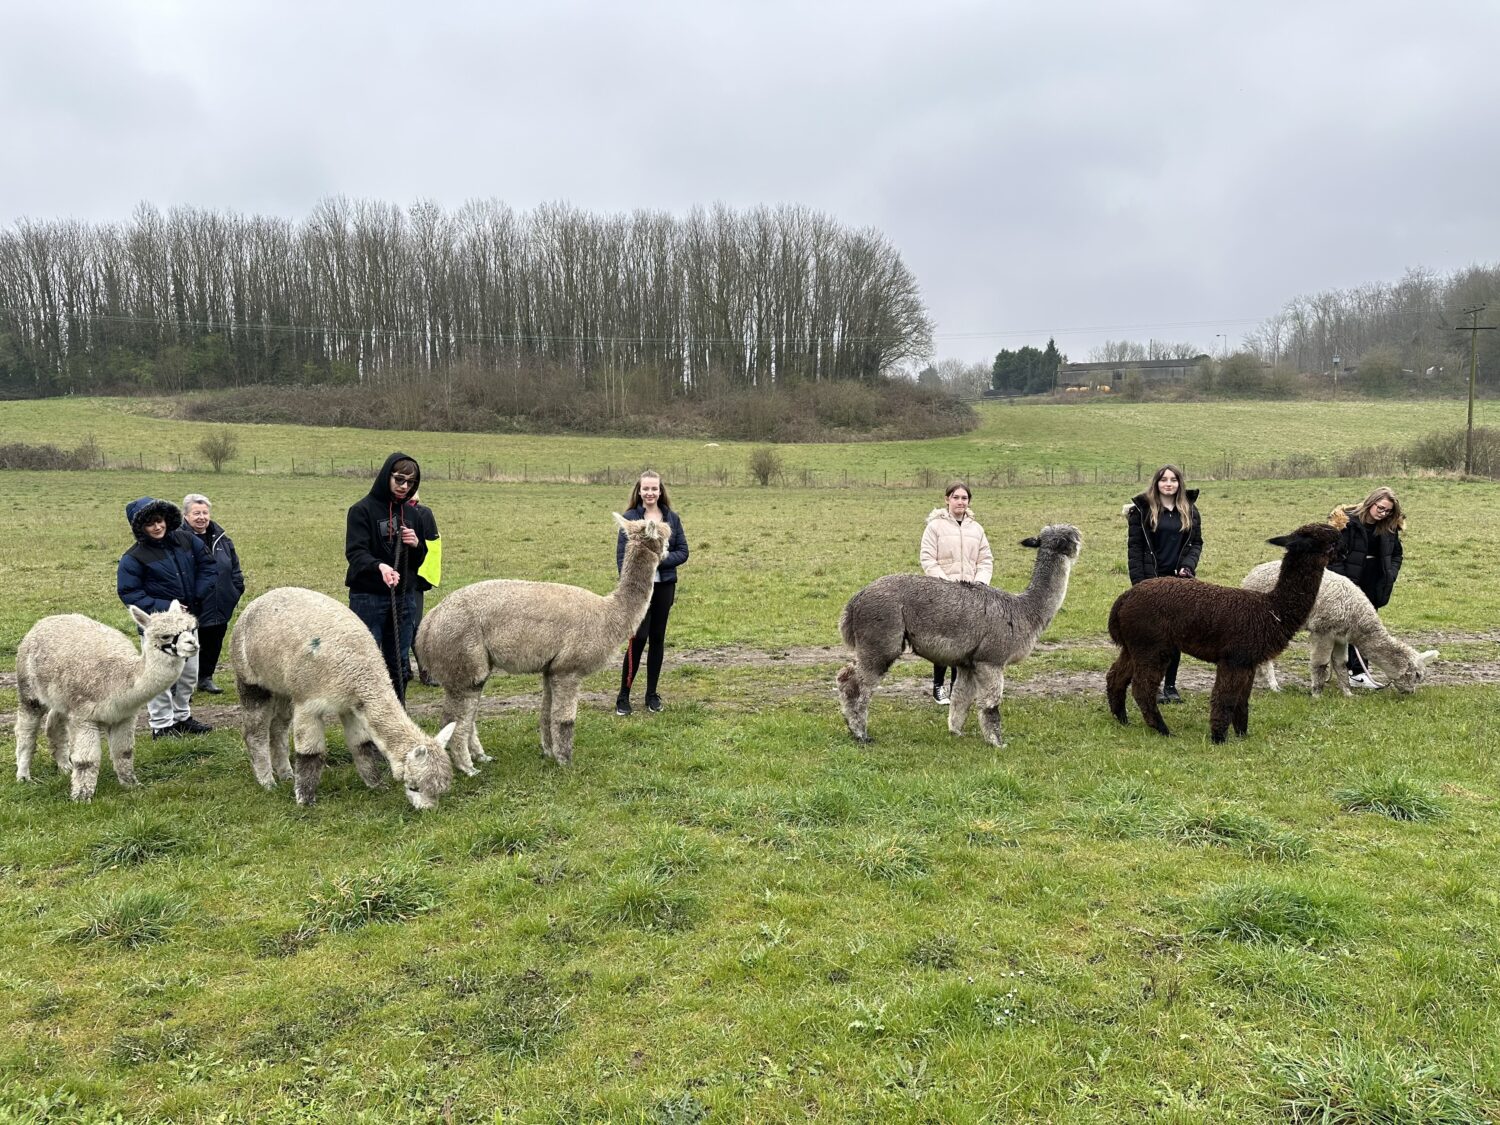 Students stood with Alpacas in a field